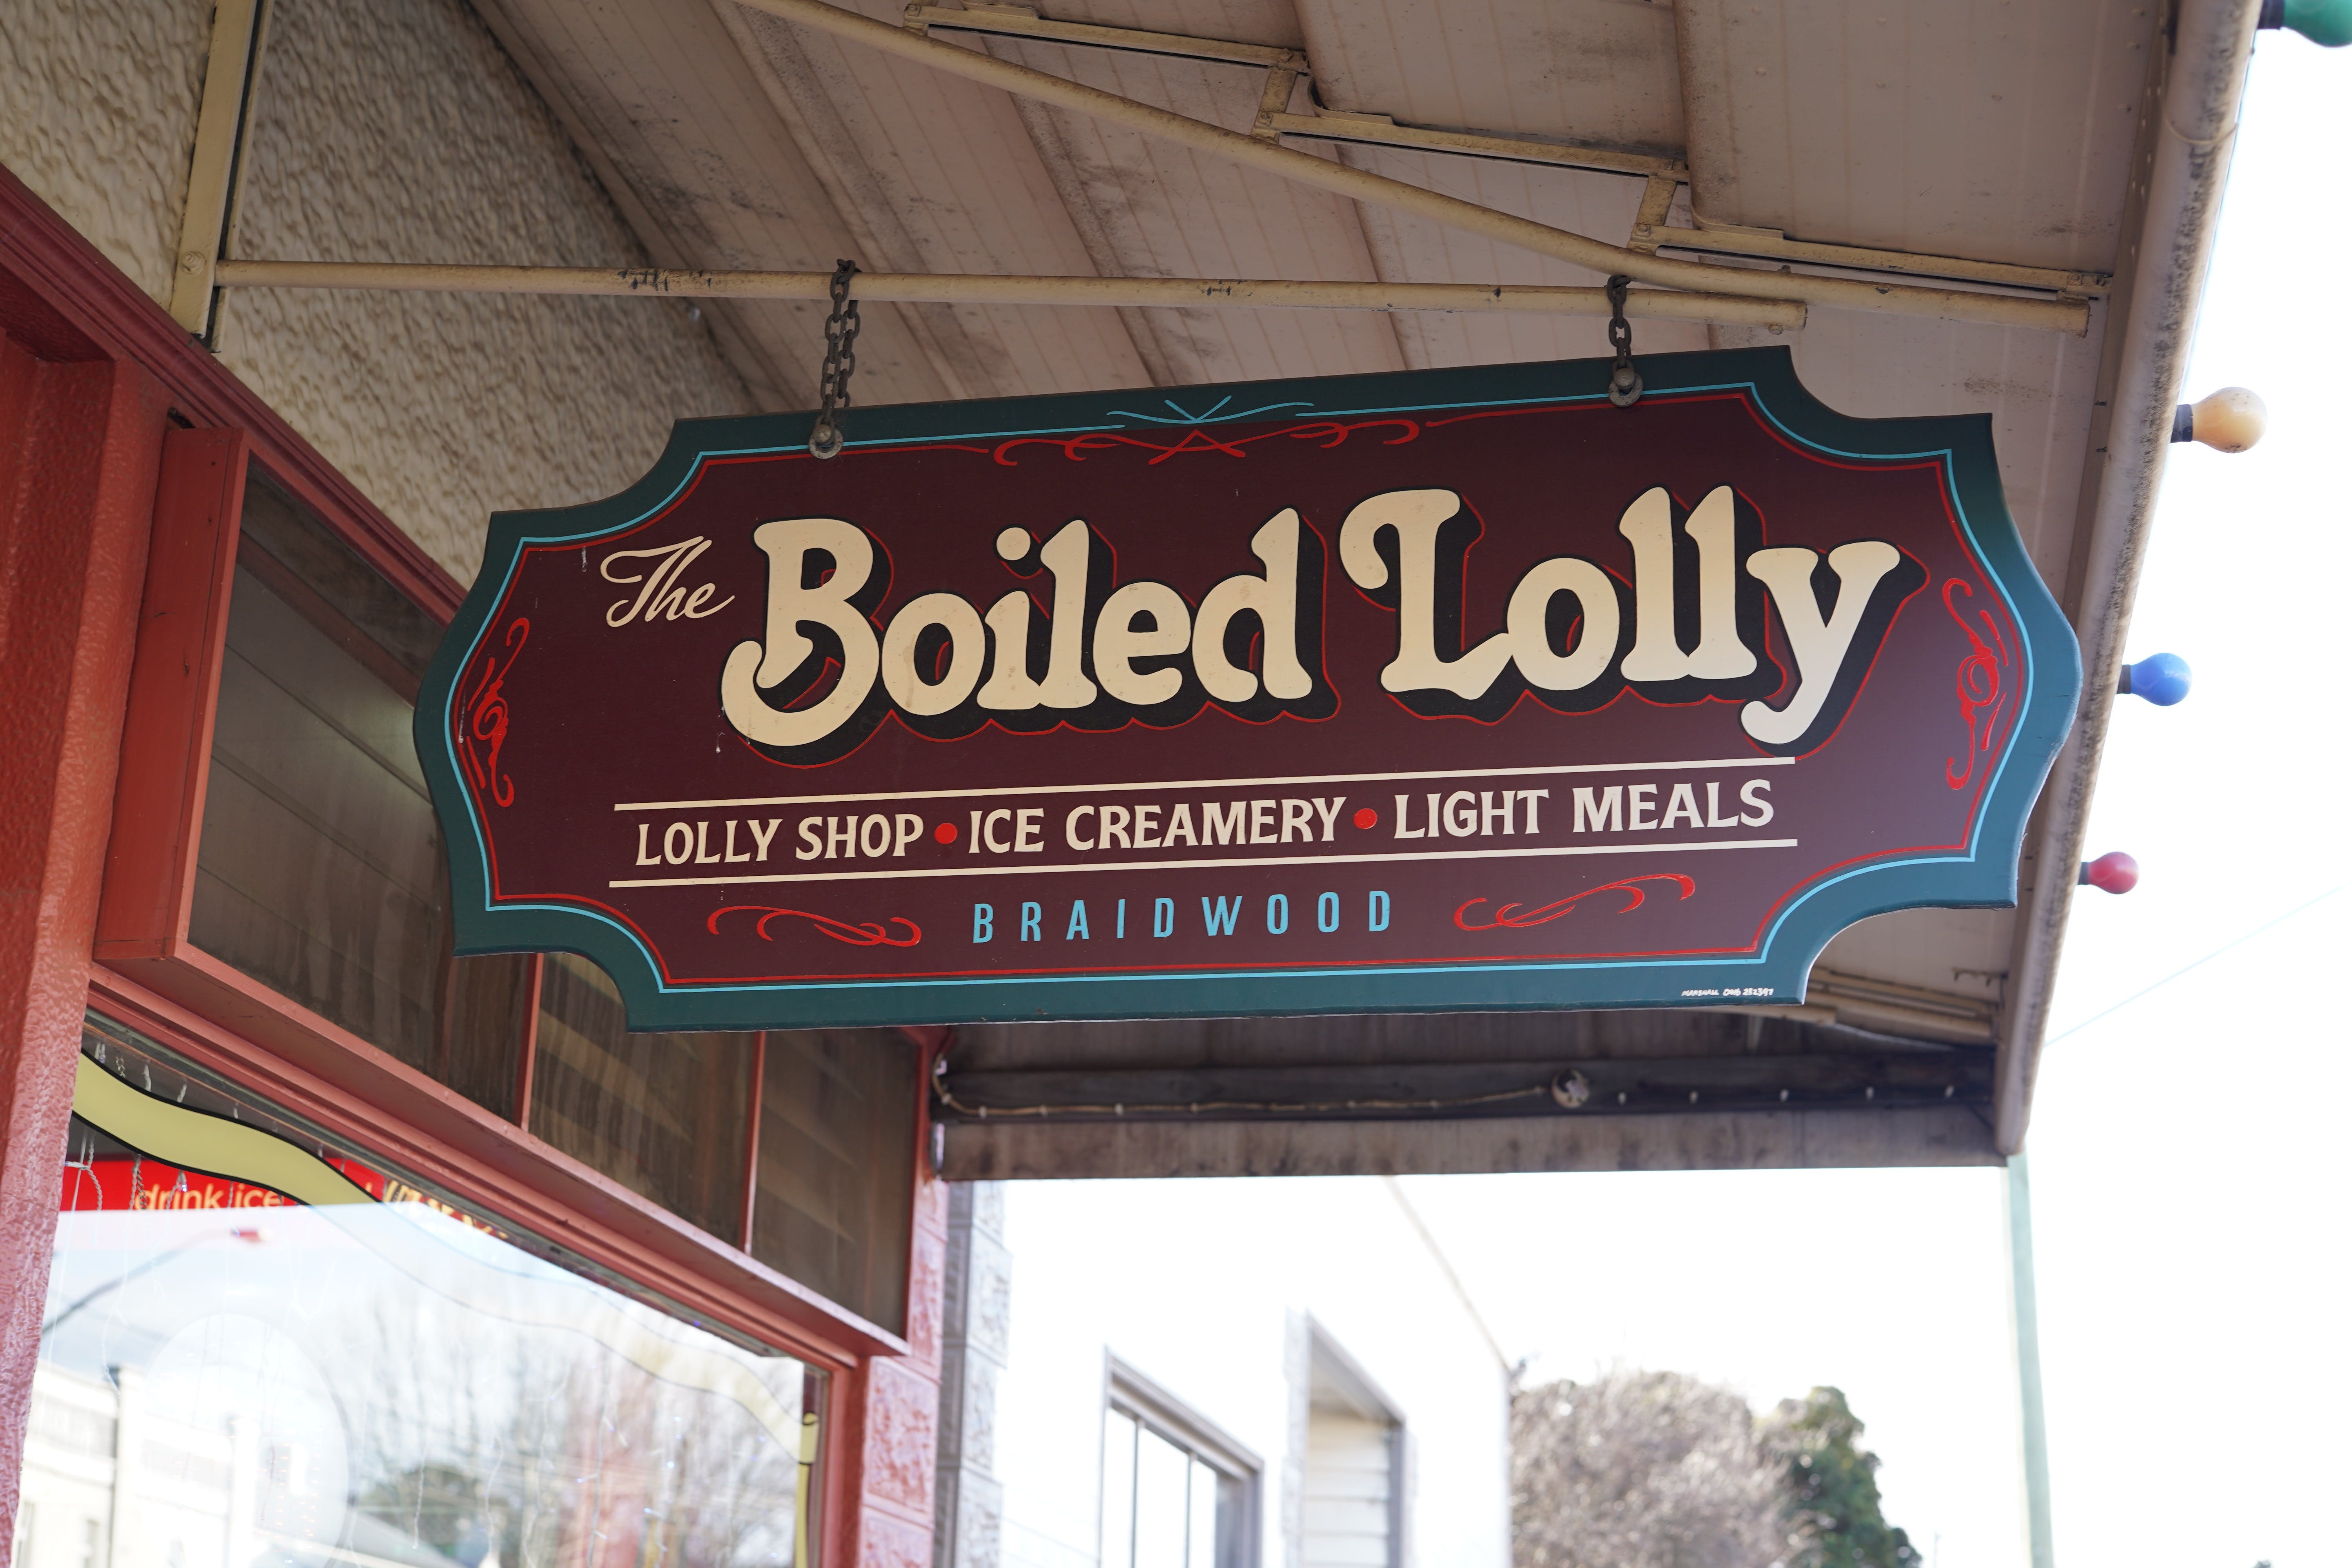 The Boiled Lolly - Hotel Accommodation